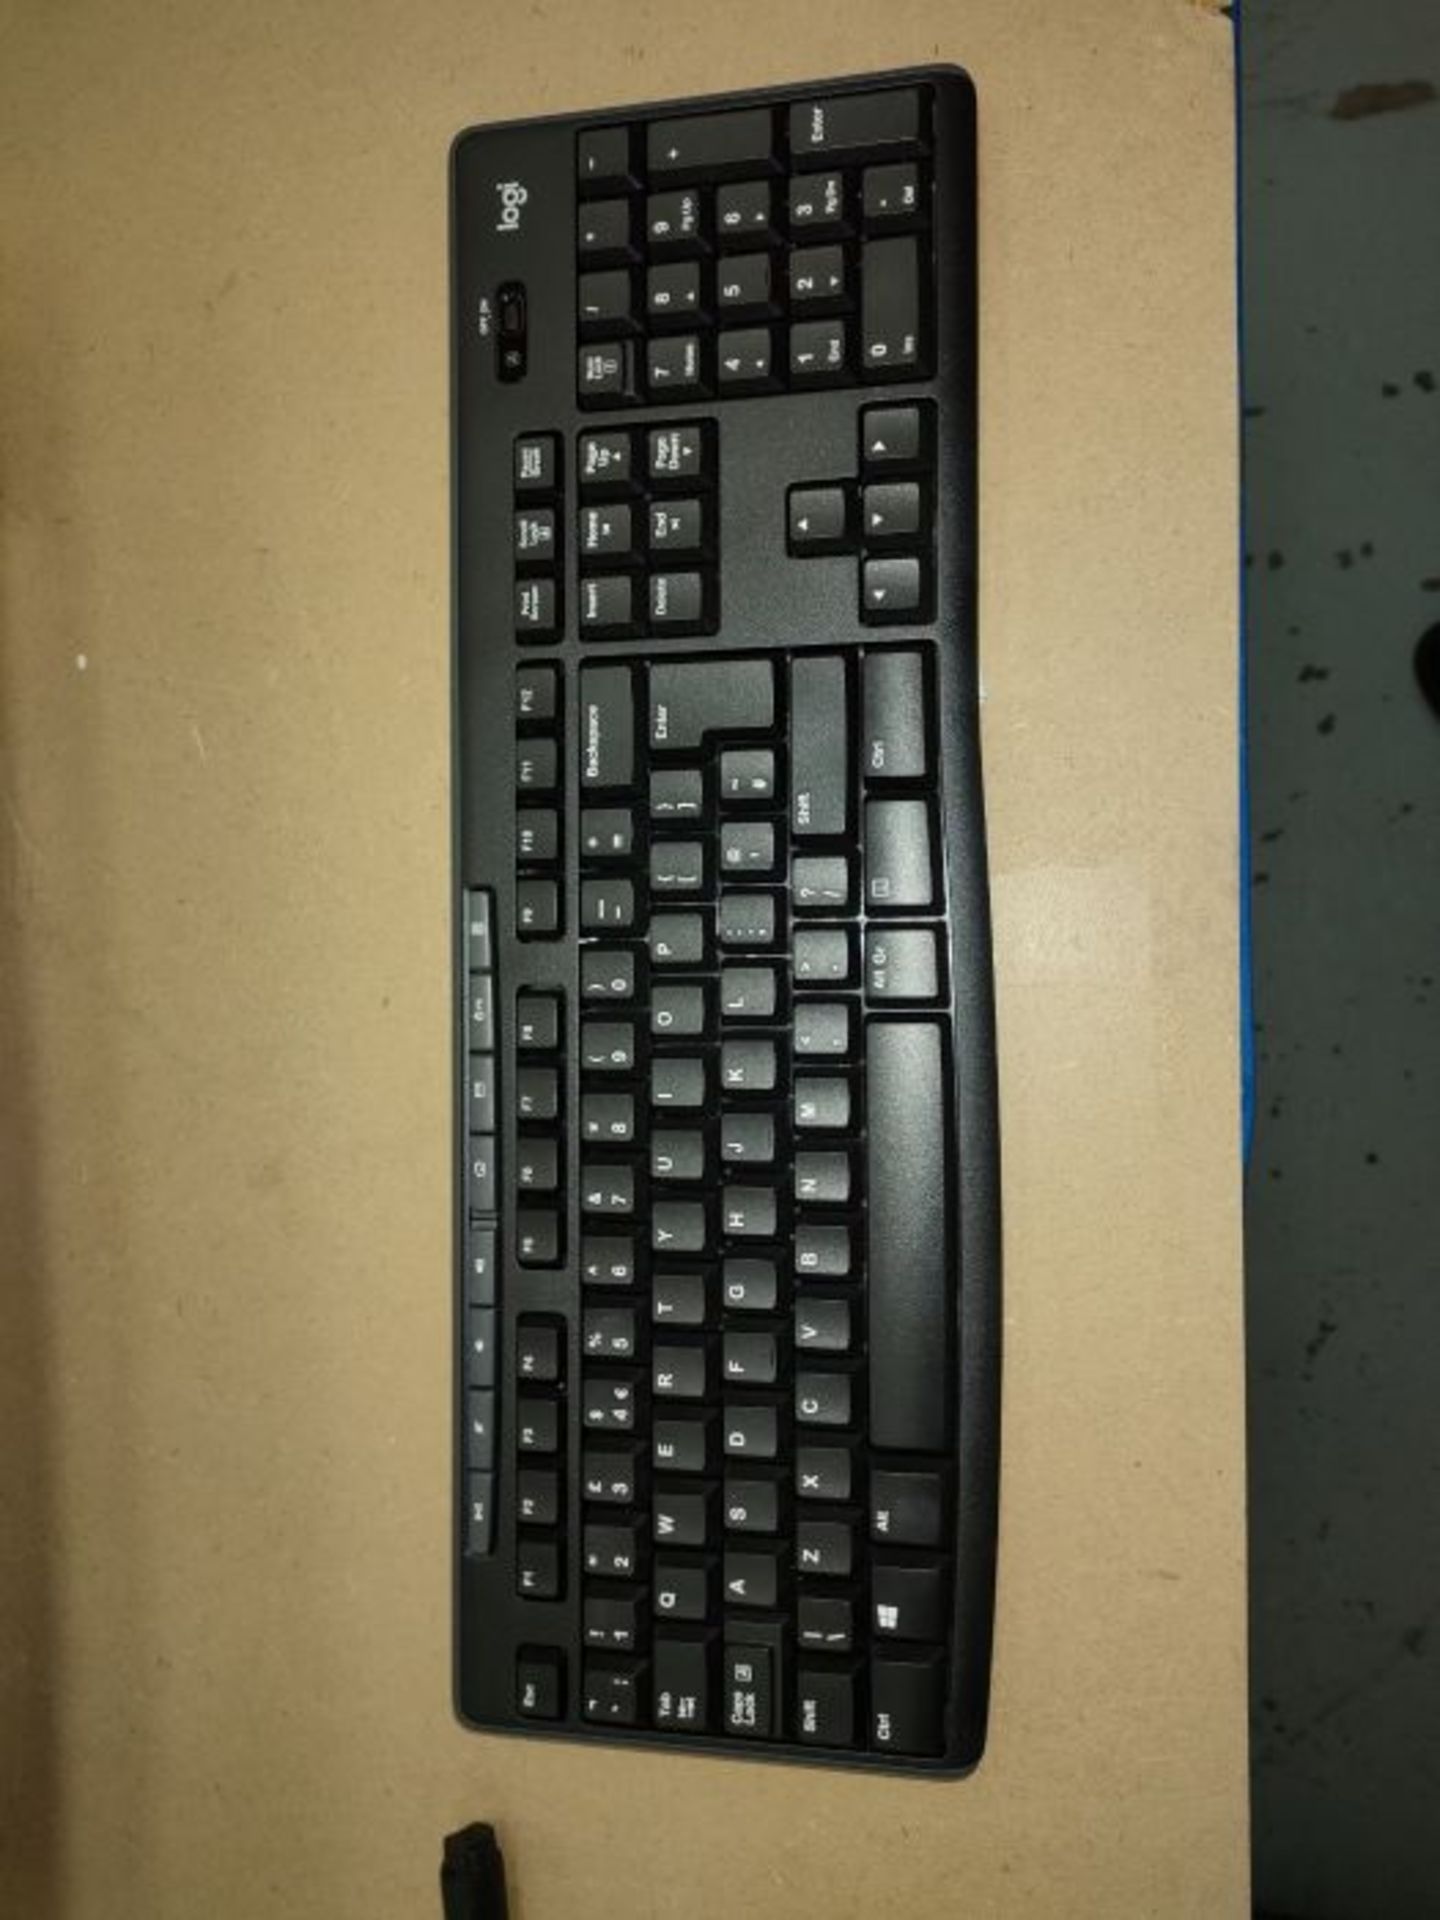 [INCOMPLETE] Logitech MK270 Wireless Keyboard and Mouse Combo for Windows, 2.4 GHz Wir - Image 3 of 3